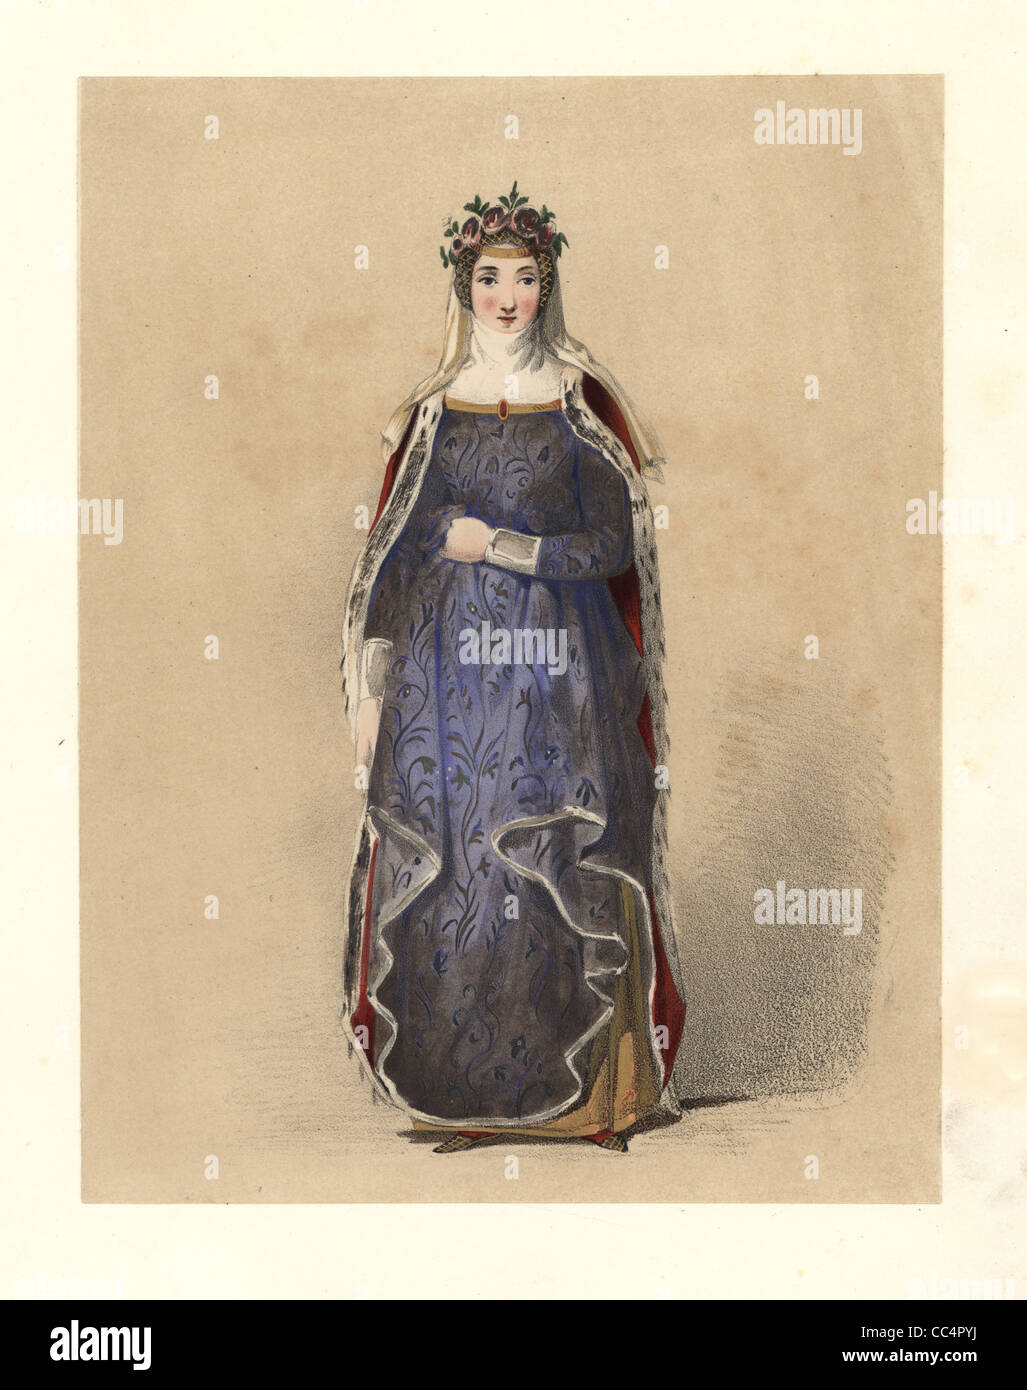 Dress of the reign of King Henry III, 12161272. Stock Photo